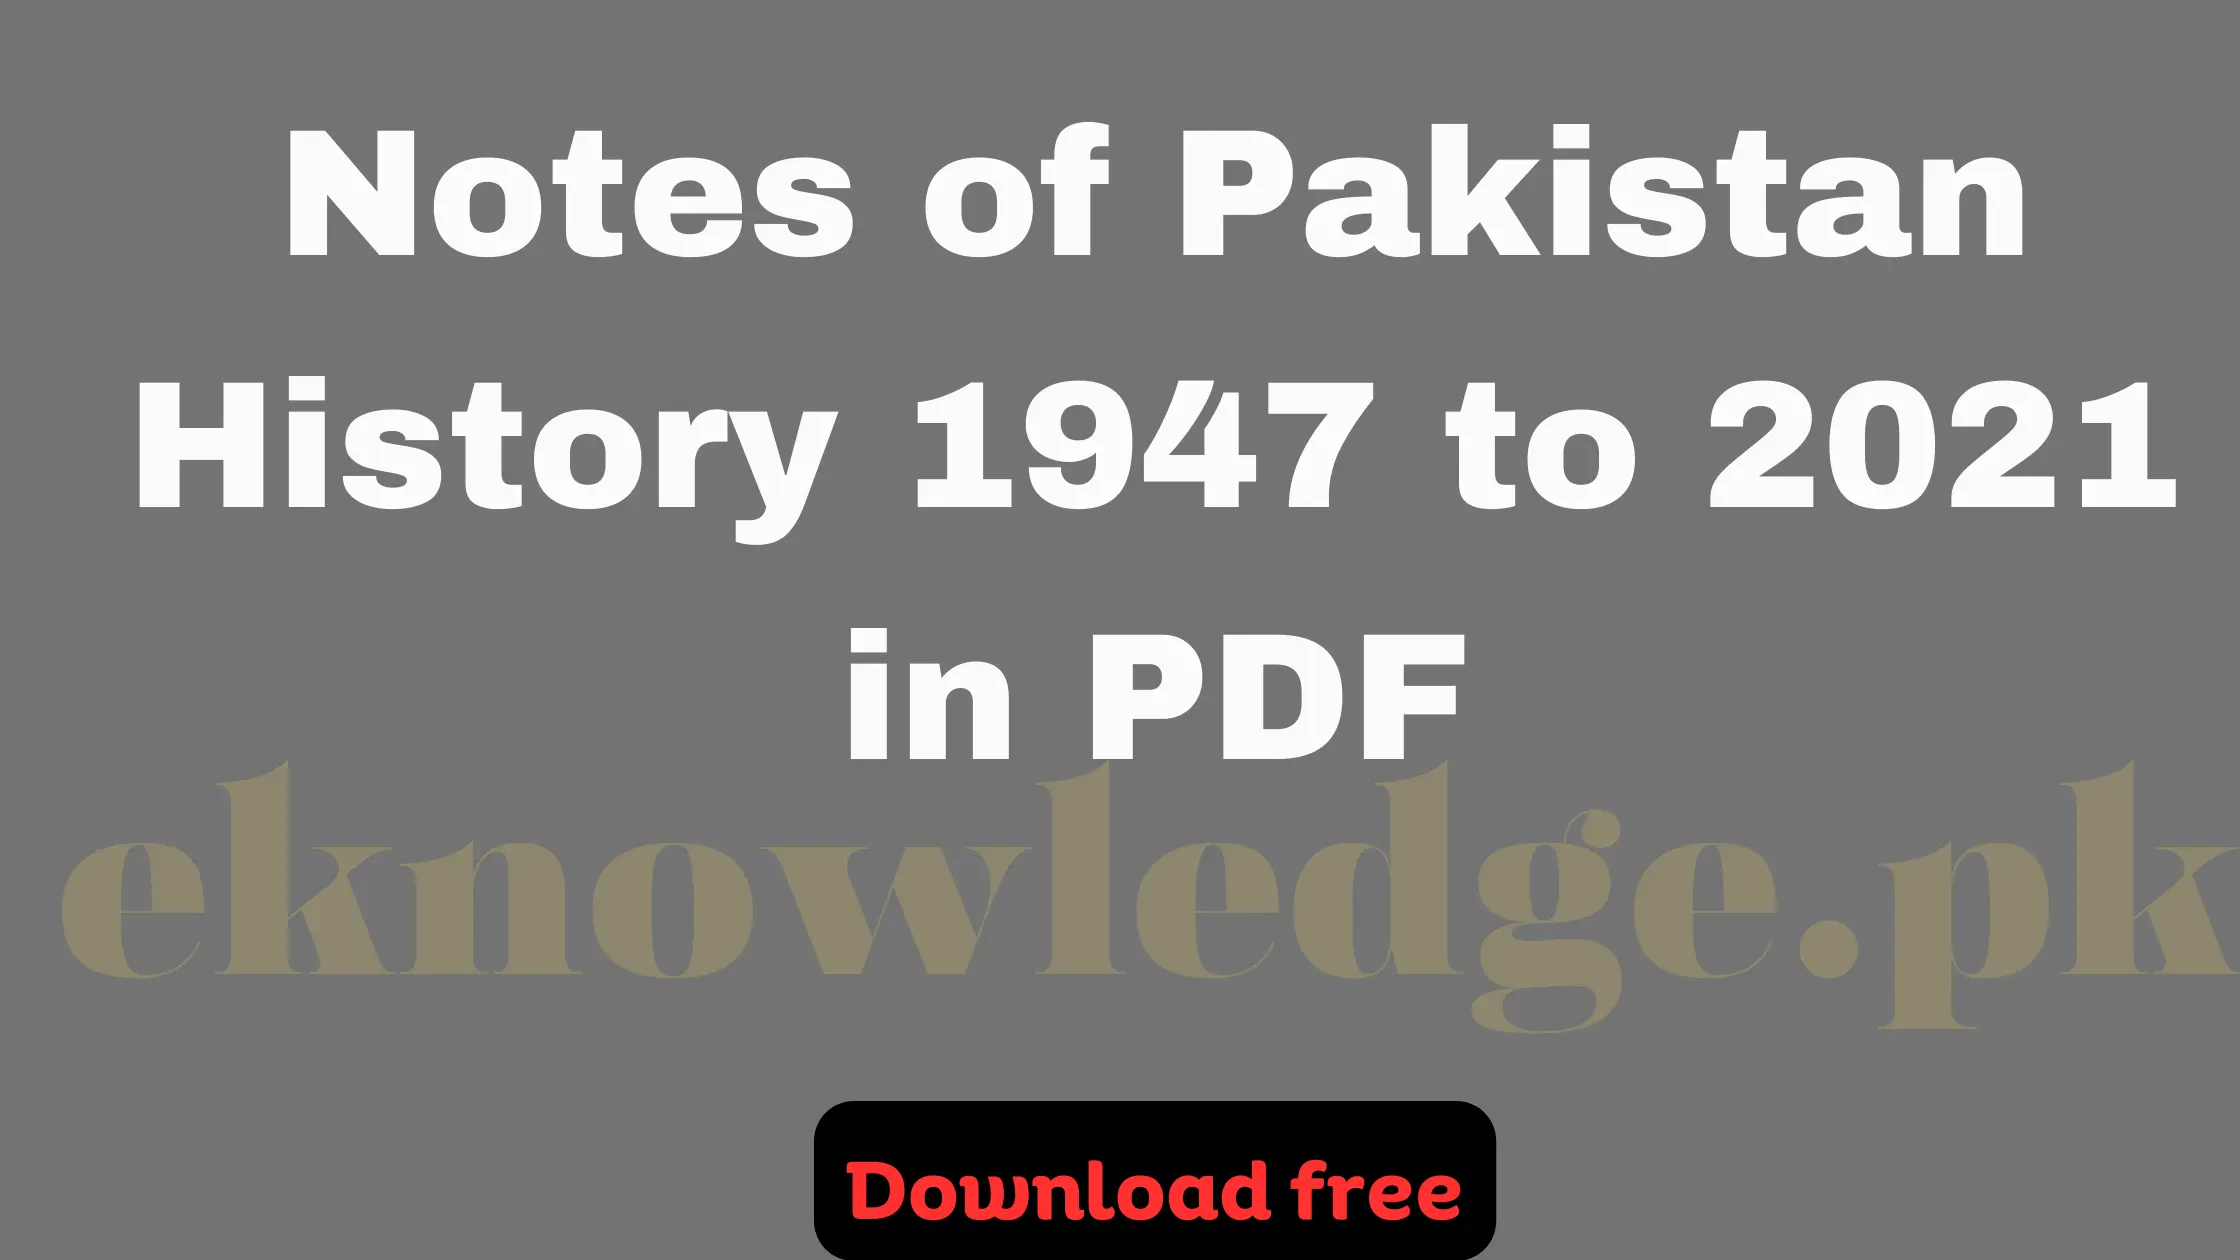 Notes of Pakistan History 1947 to 2021 in PDF